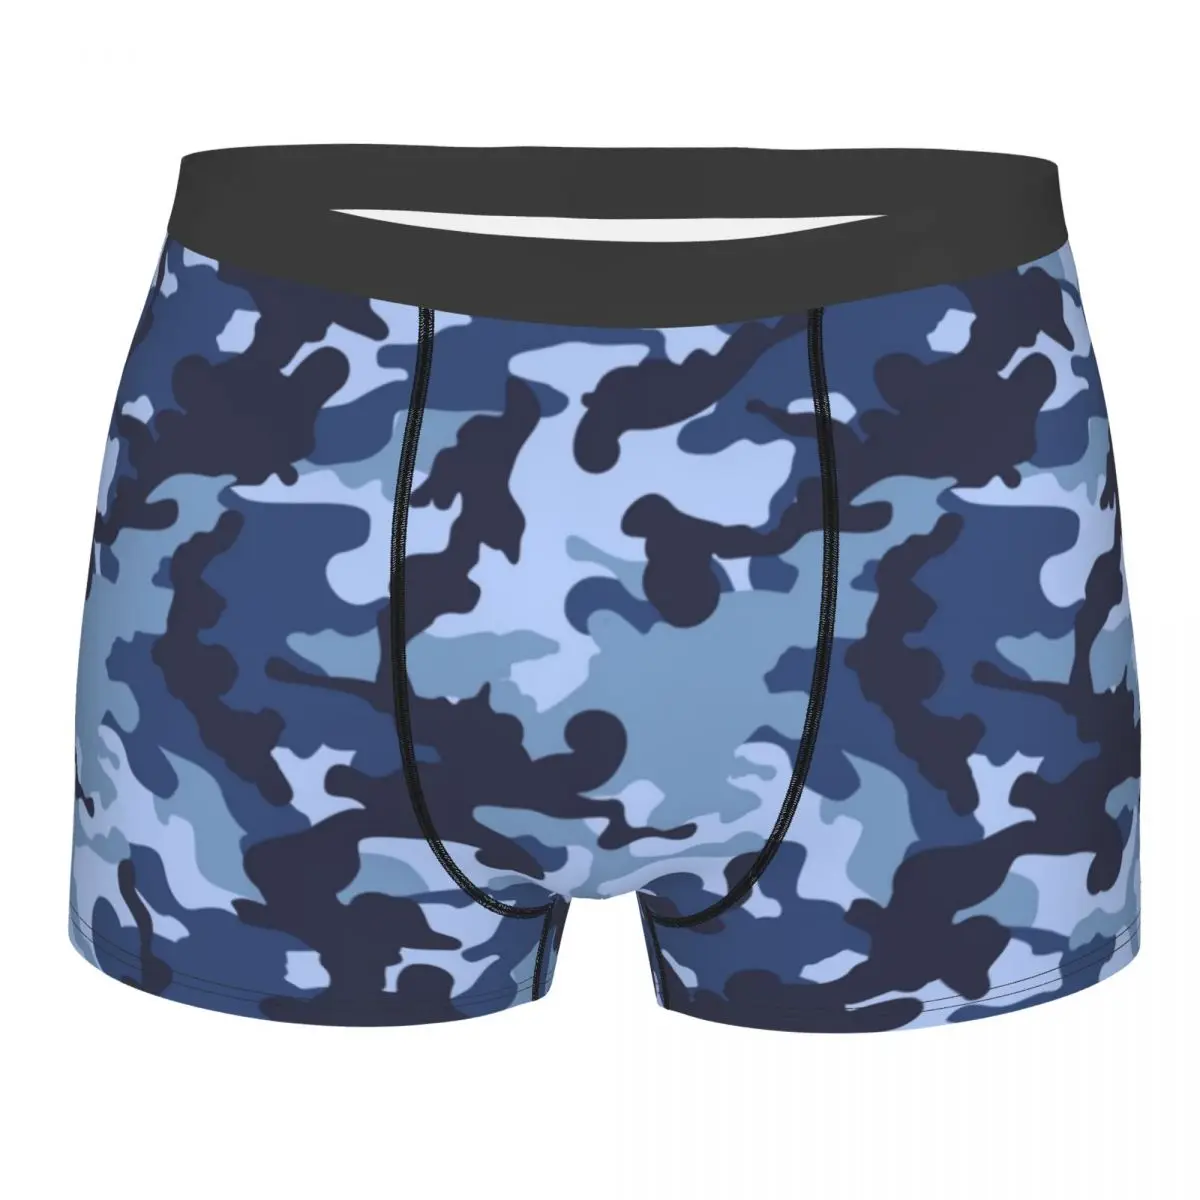 

Man Navy Blue Camouflage Camo Pattern Boxer Briefs Shorts Panties Soft Underwear Military Male Funny Plus Size Underpants